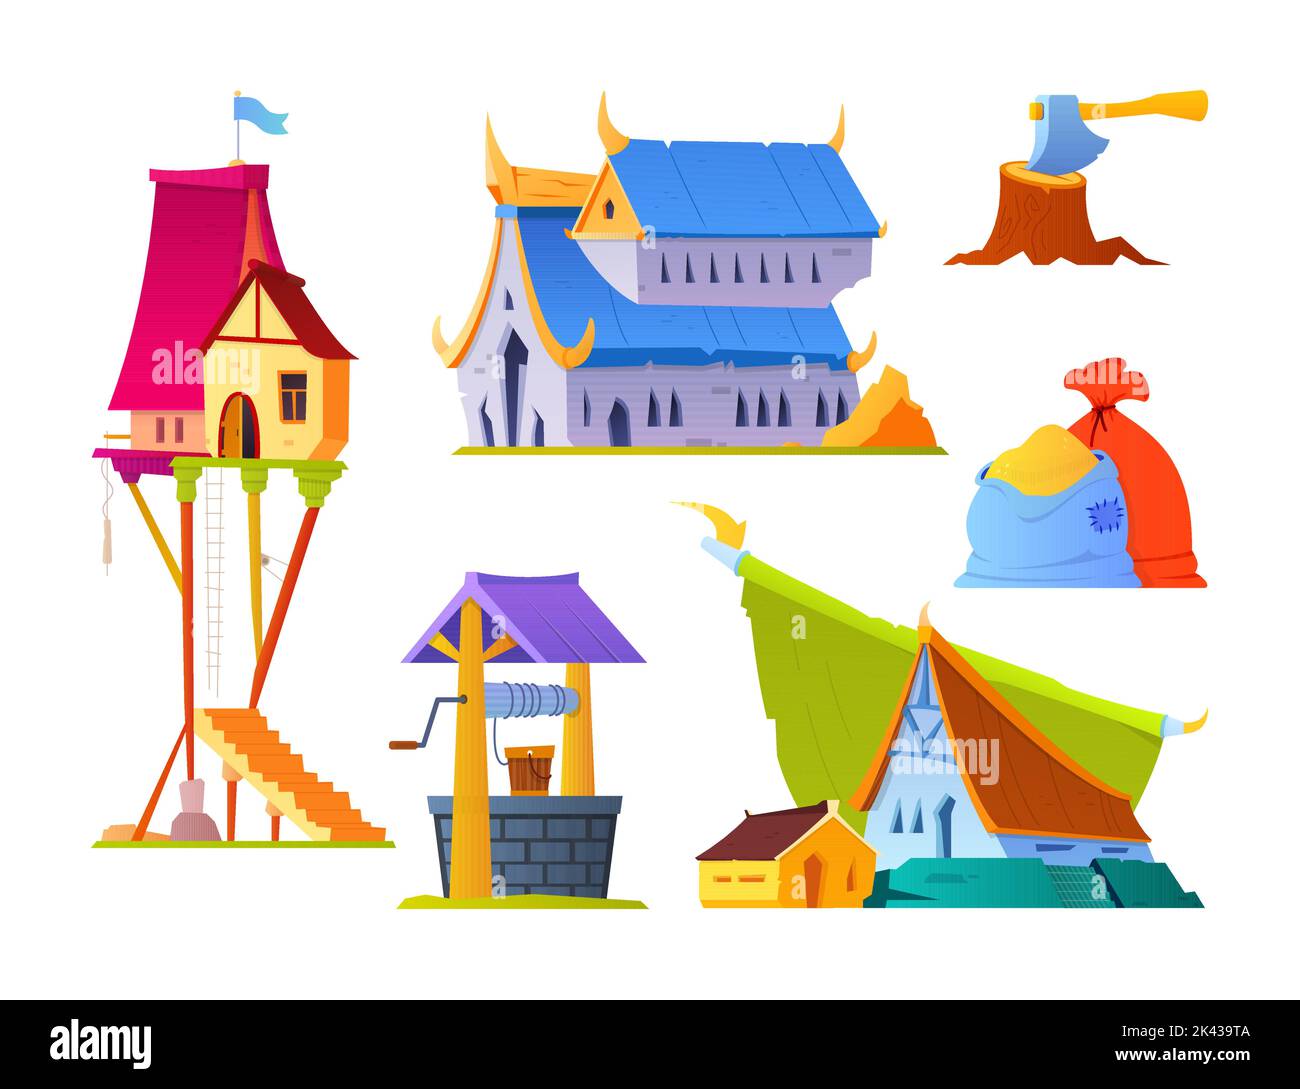 Life in a medieval village - flat design style objects set. High quality colorful images of buildings and architecture, a well, stocks of grain in bag Stock Vector